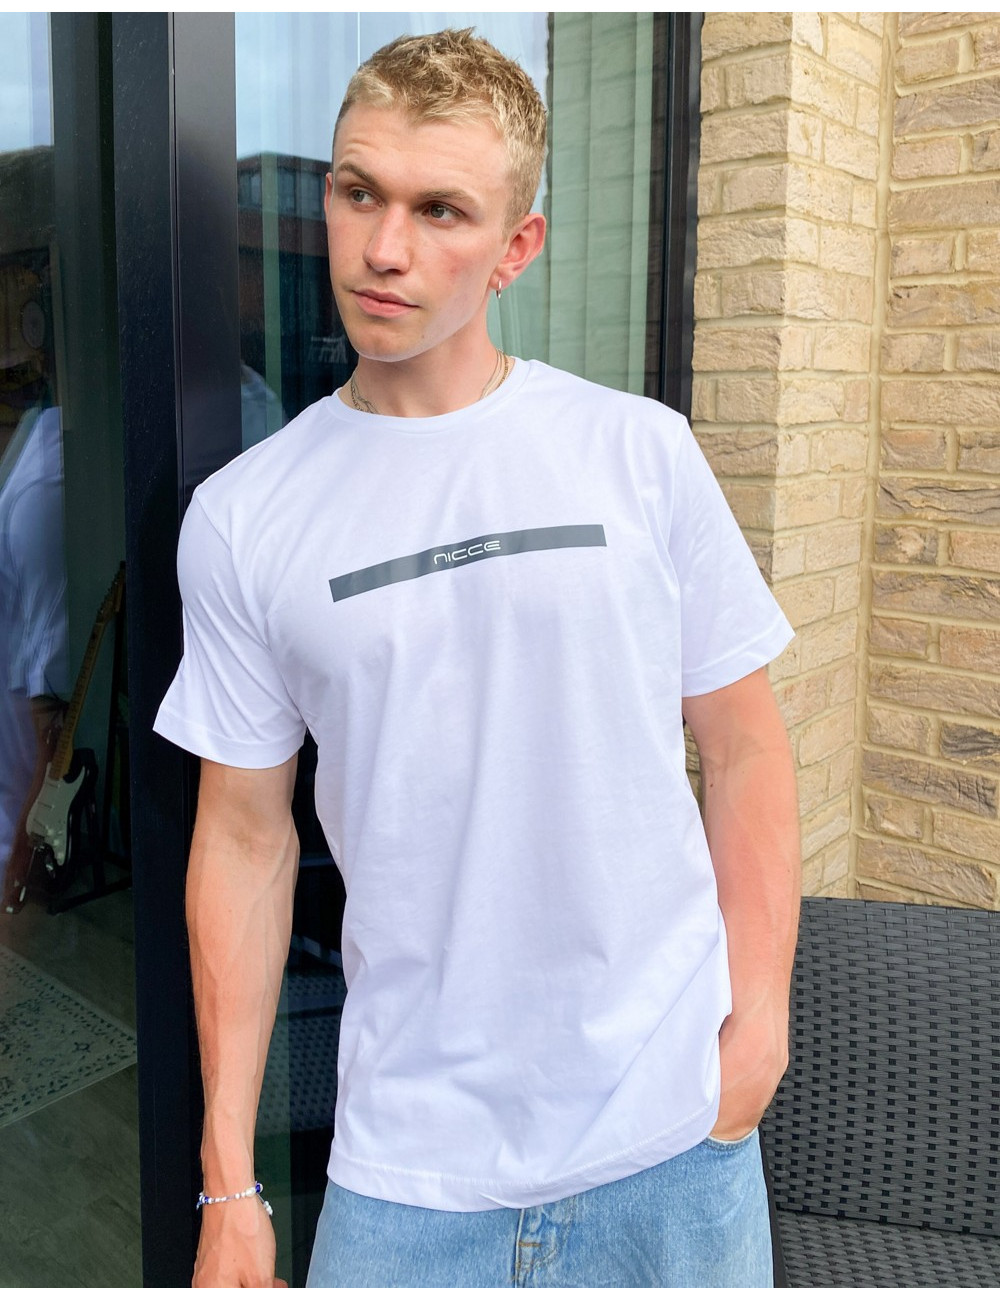 Nicce element t-shirt in white